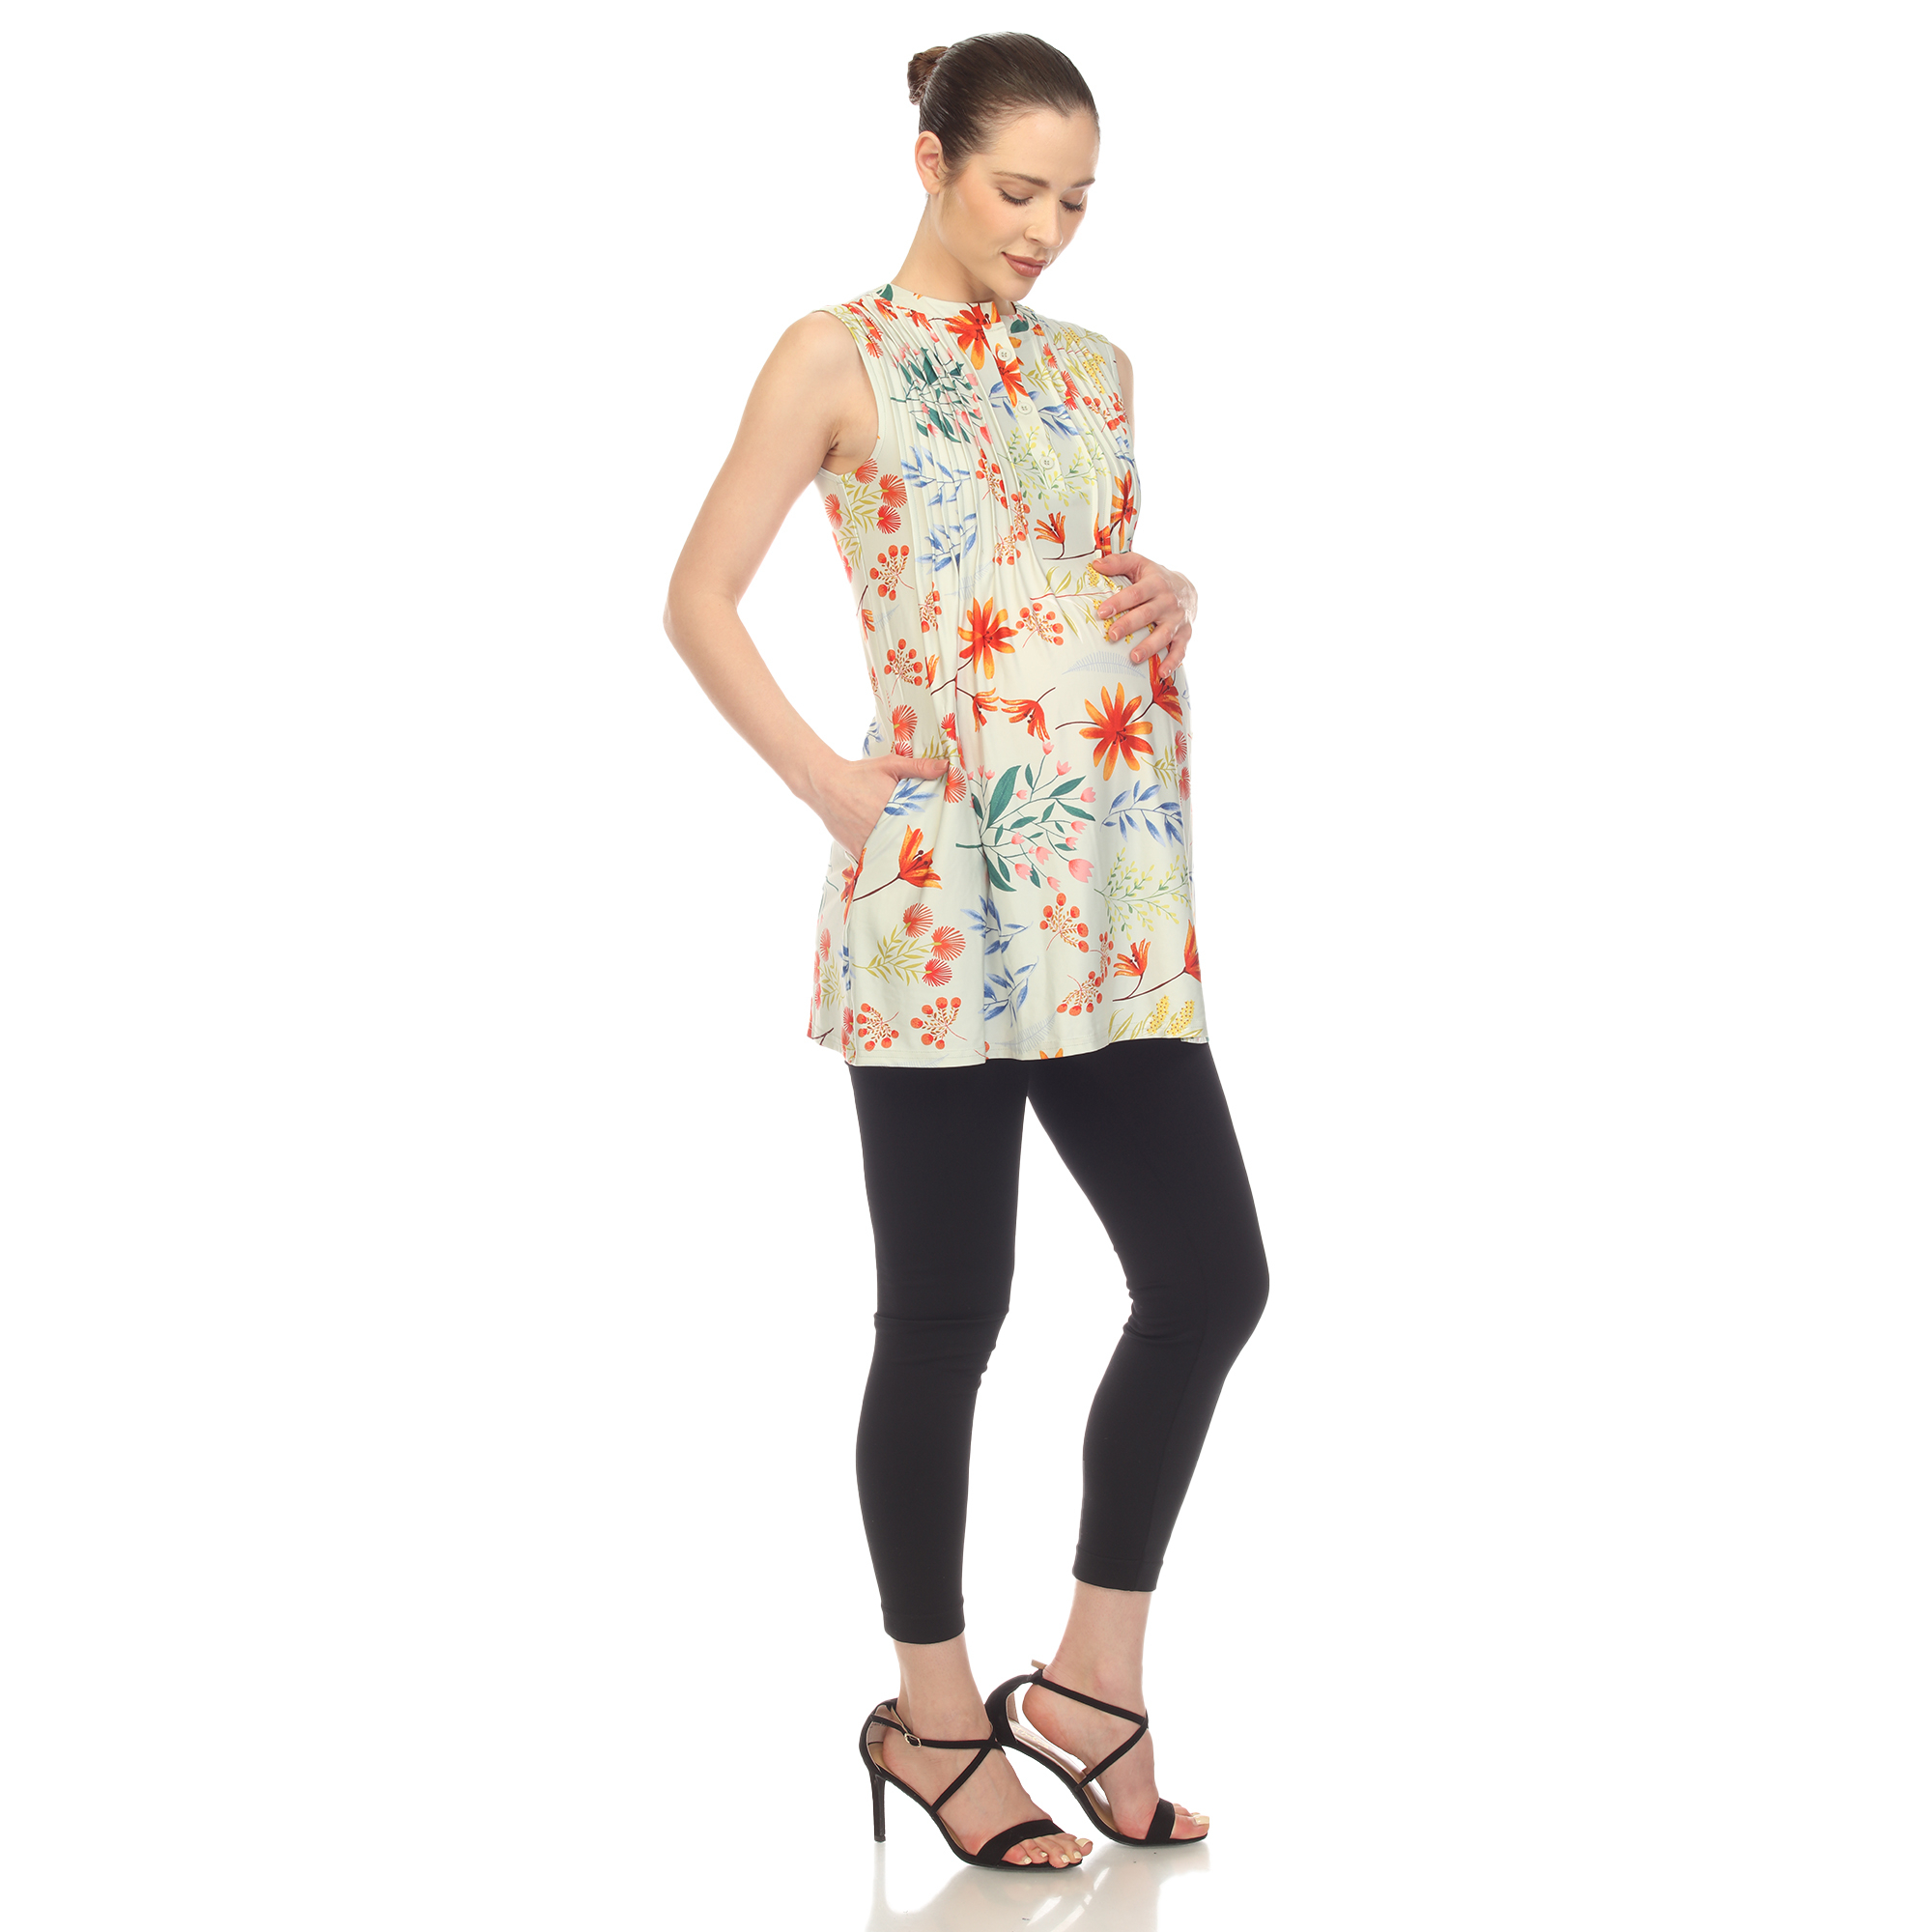 White Mark Women's Maternity Floral Sleeveless Tunic Top - Sage, X-Large